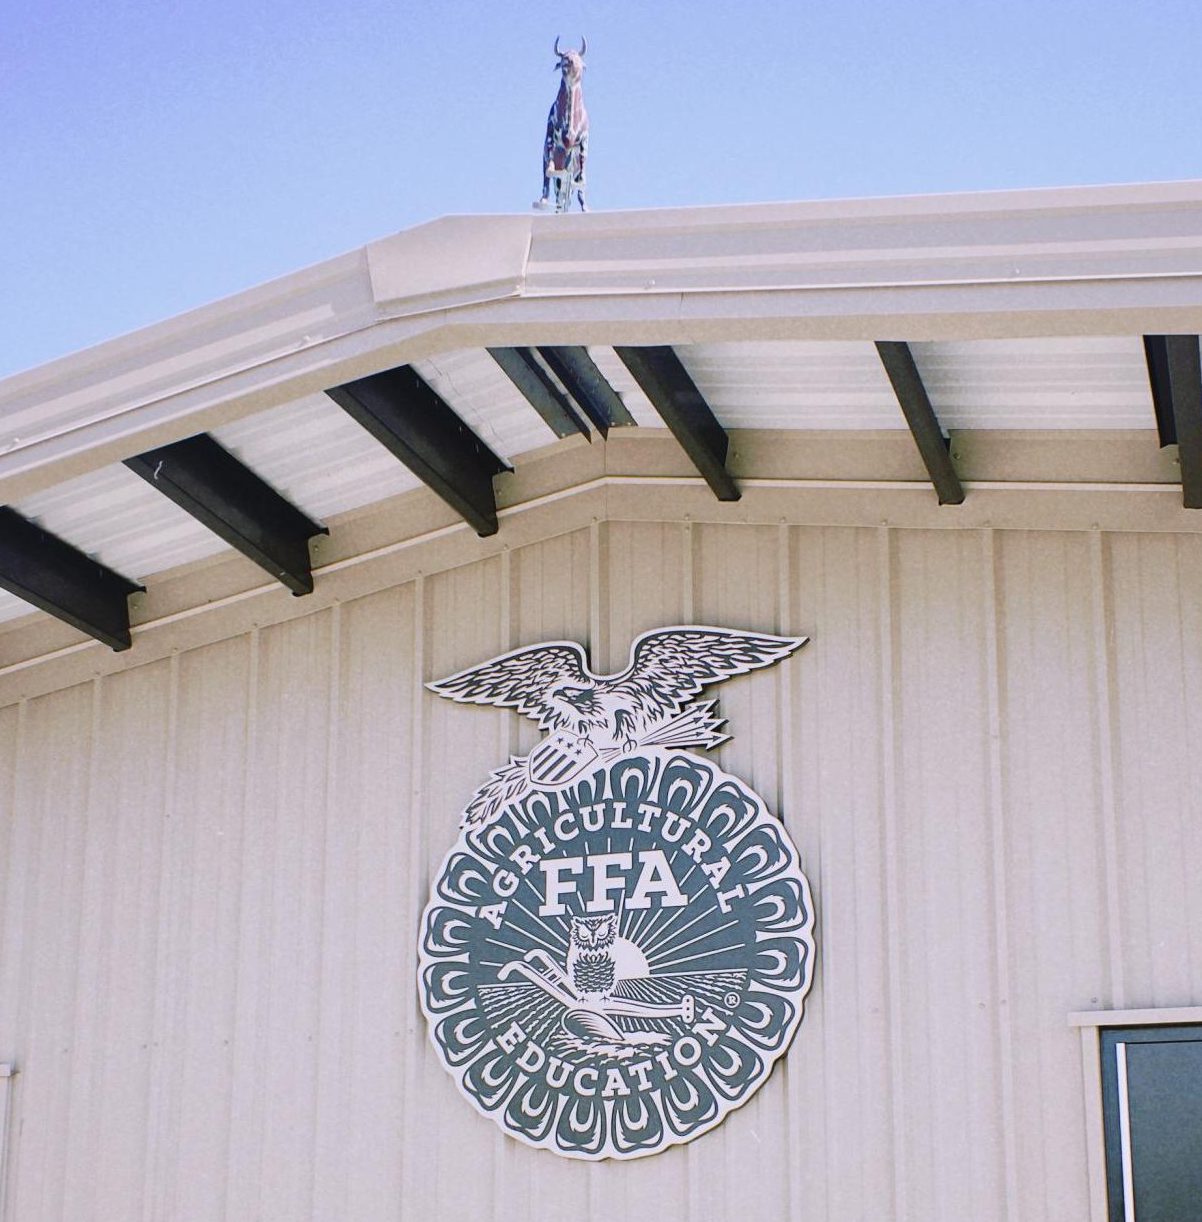 The cow barn in the FFA farm introduces visitors will  large seal stating Agricultural FFA Education.